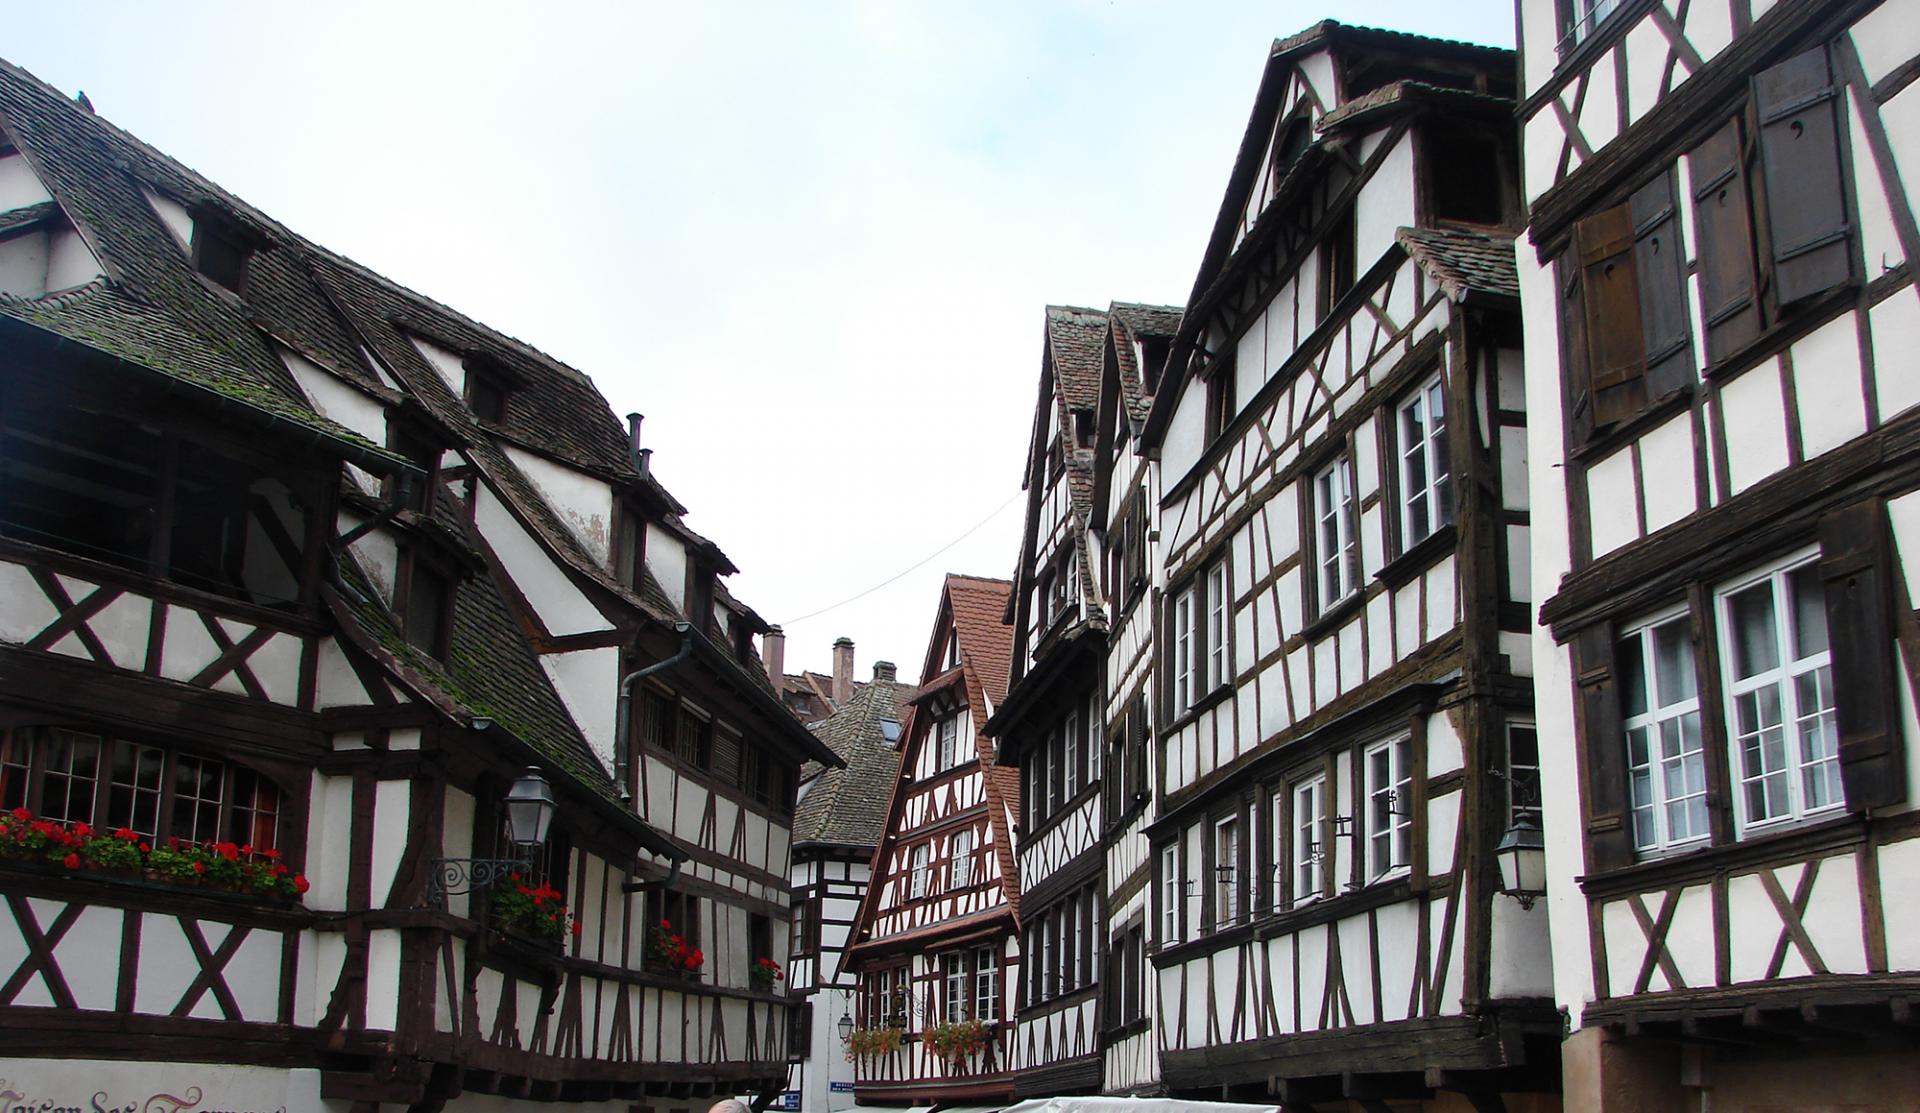 Strasbourg (France) attractions